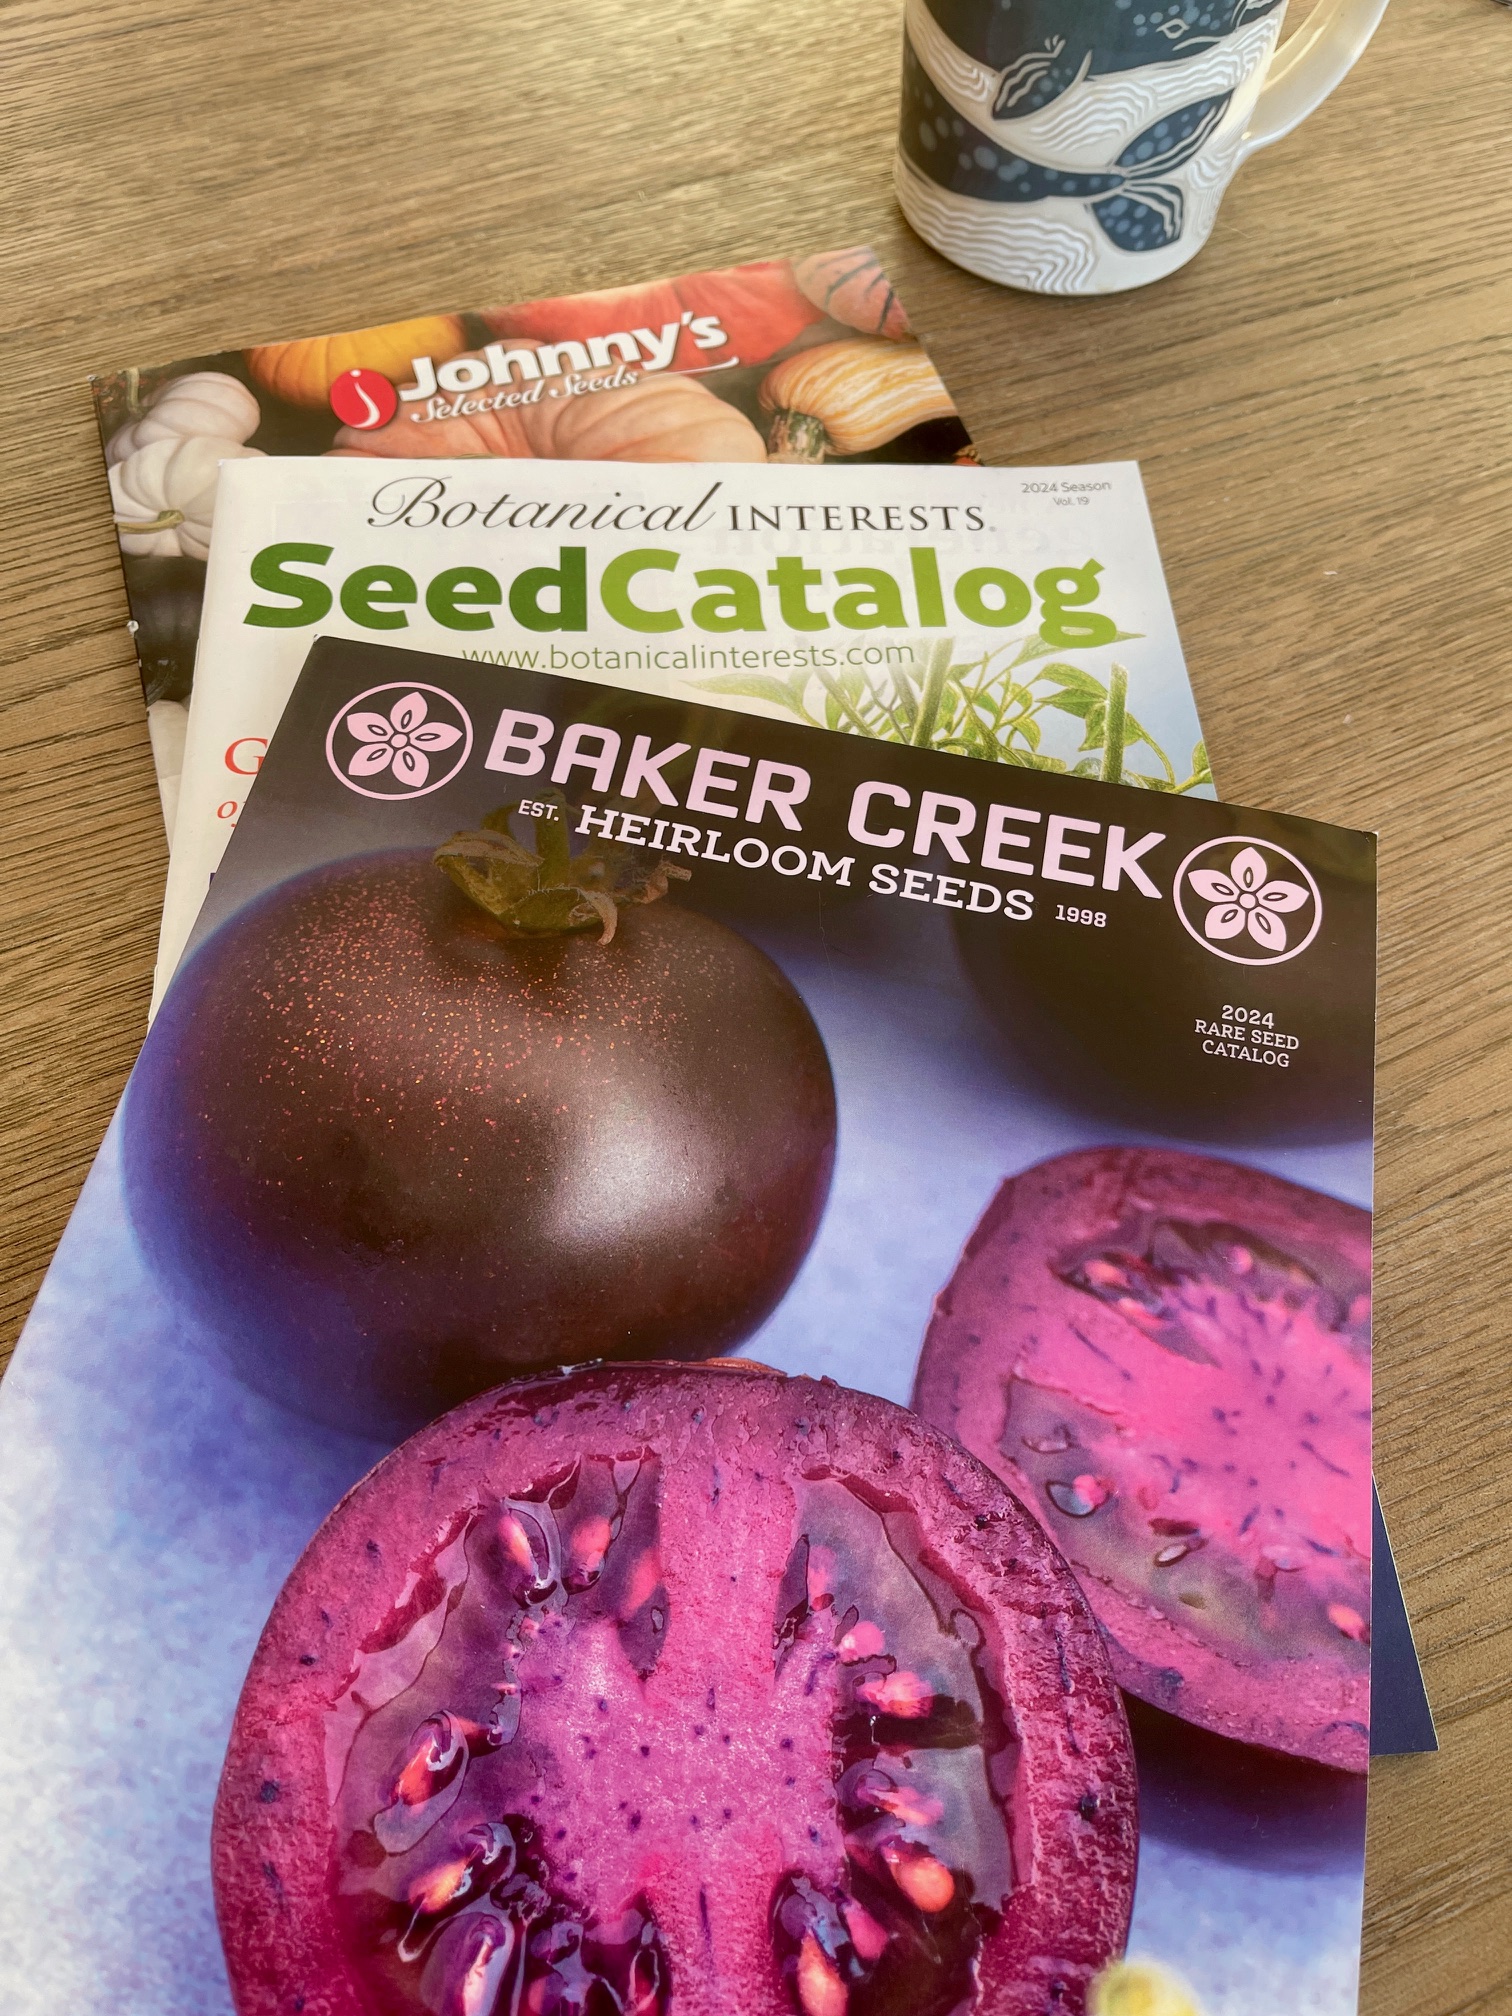 Free Garden Seed Catalogs – Check Out This Big List!